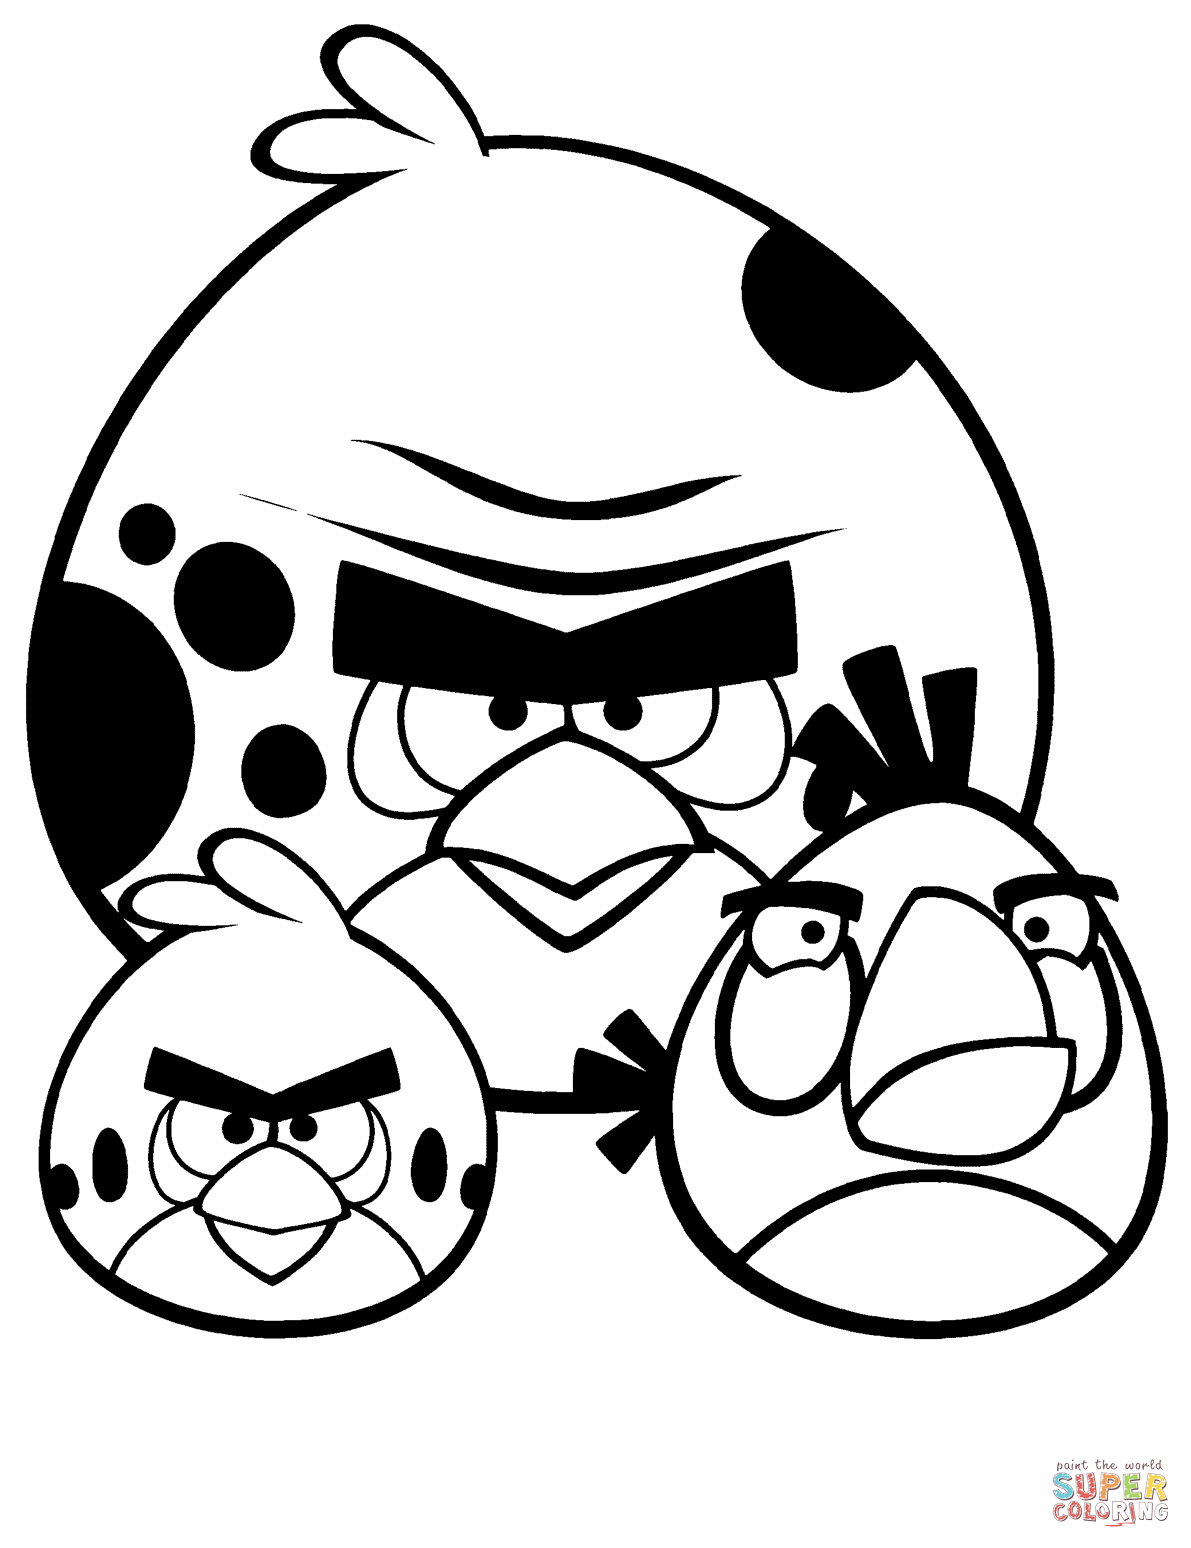 Angry Birds coloring pages | Free Coloring Pages